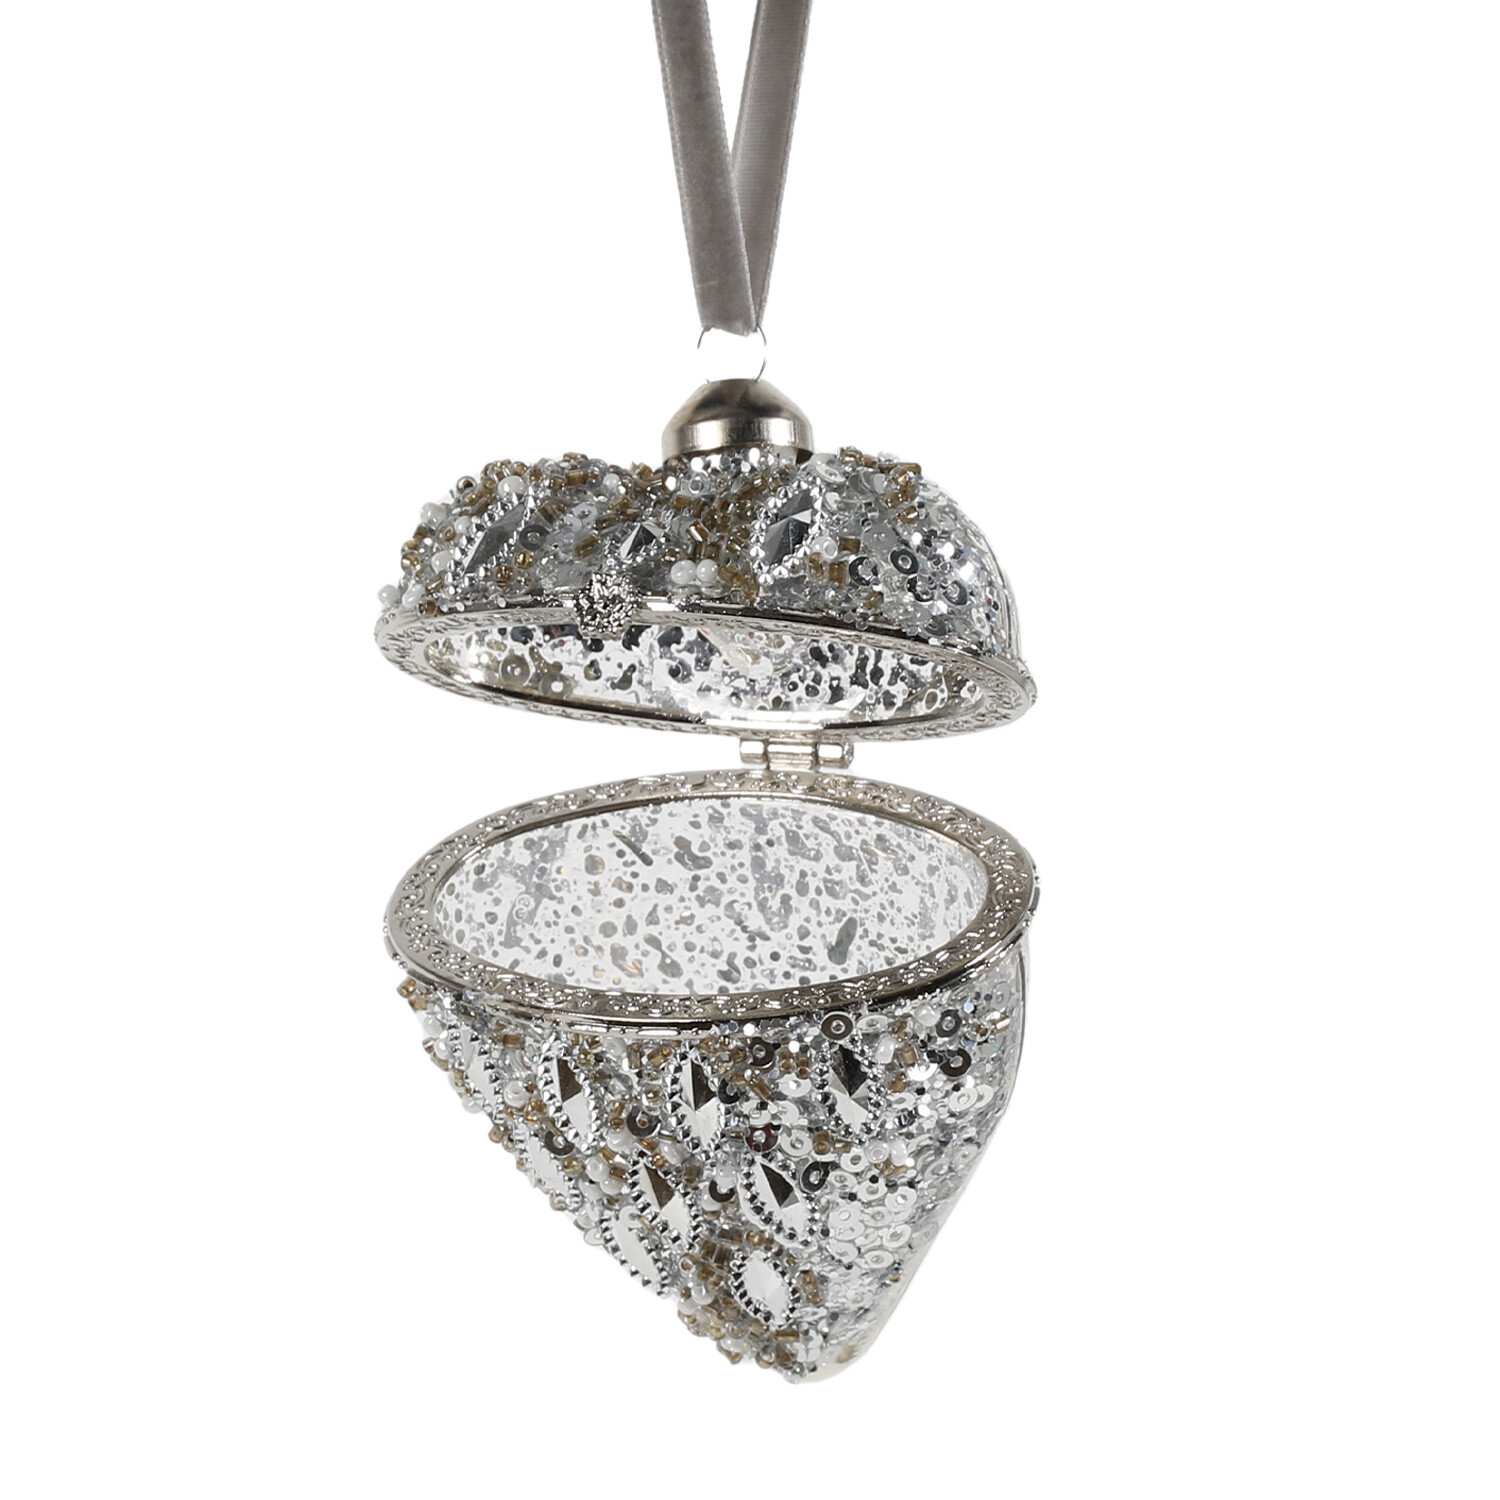 Chic Noir Silver Jewelled Heart Bauble with Compartment Image 2